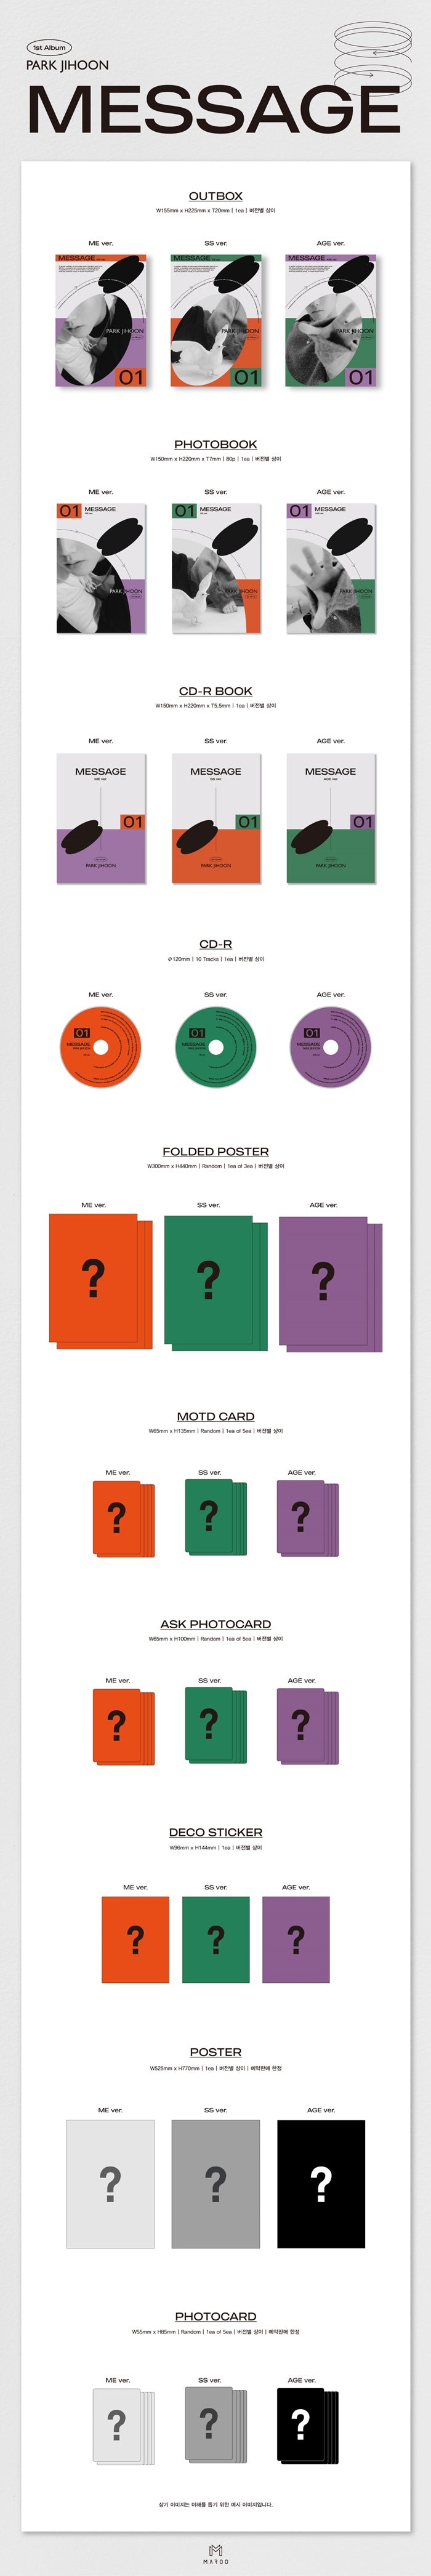 1 CD
1 Folding Poster On Pack
1 Photo Book (80 pages)
1 MOTD Card
1 Ask Photo Card
1 Deco Sticker